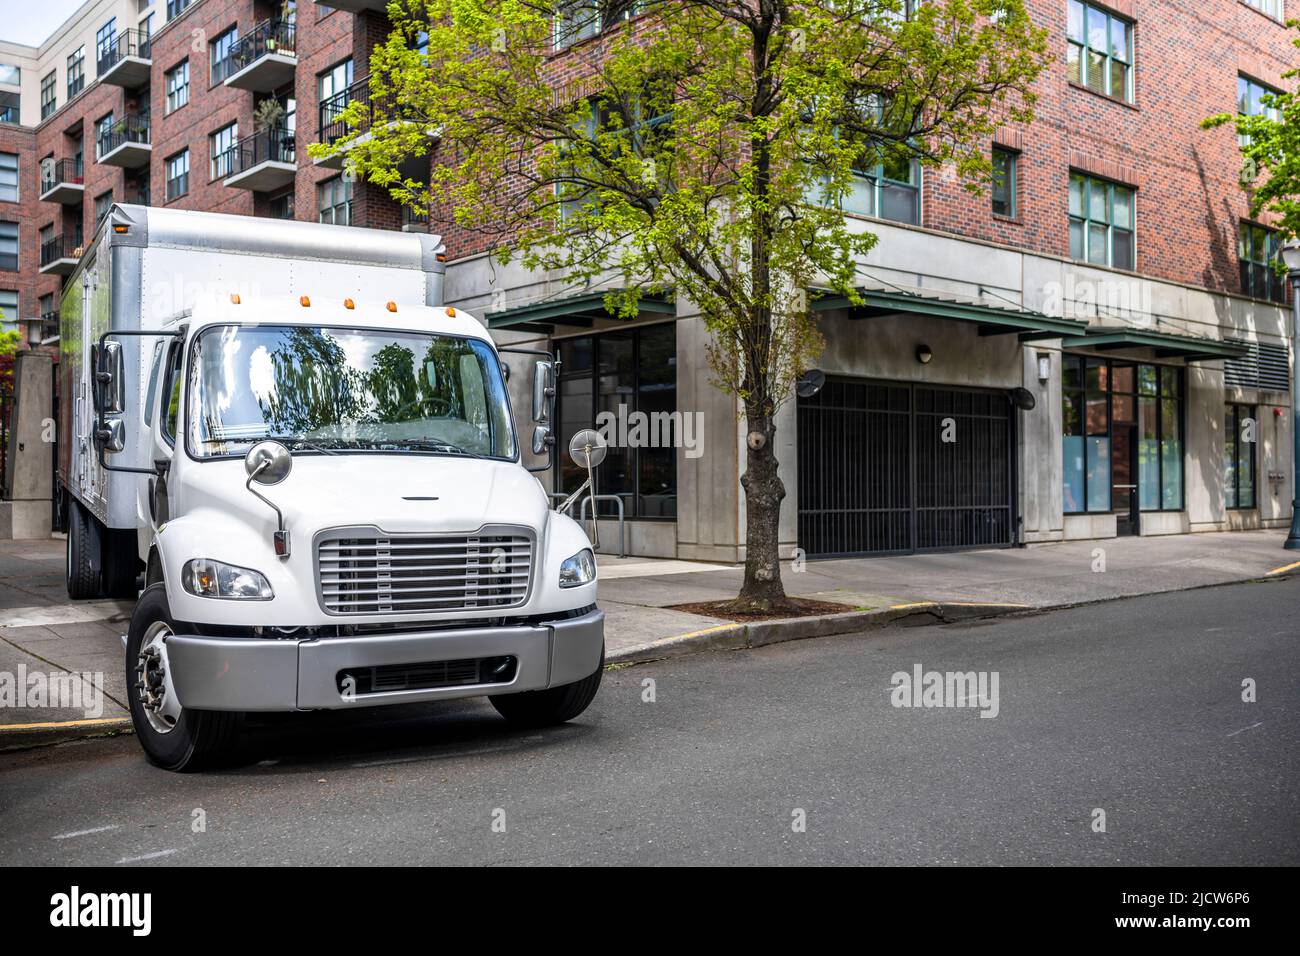 Big rig day cab white semi truck with long box trailer making local commercial delivery at urban city with multilevel residential apartments buildings Stock Photo